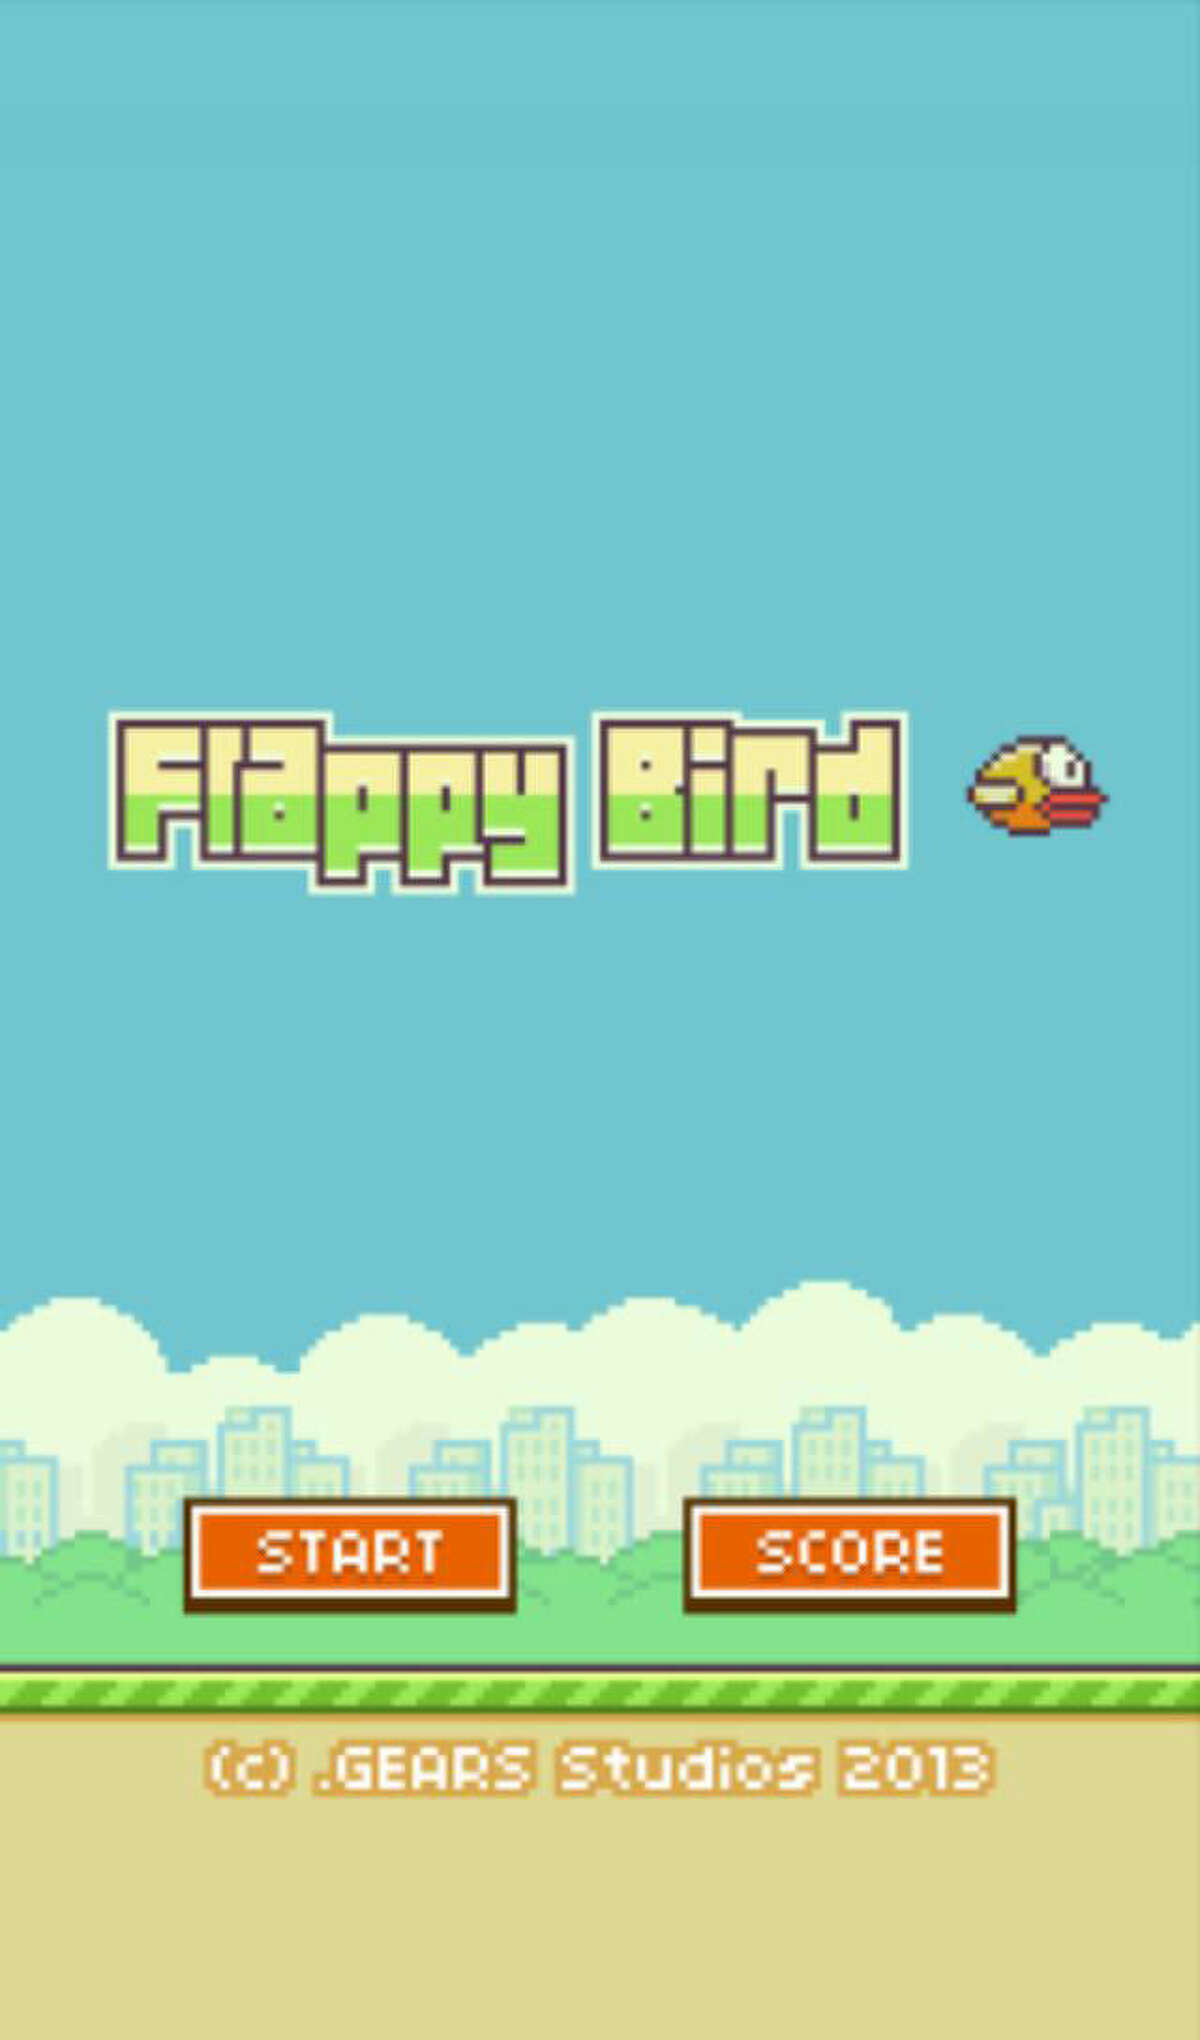 The free game app “Flappy Bird” is earning an average $50,000 a day from ads.